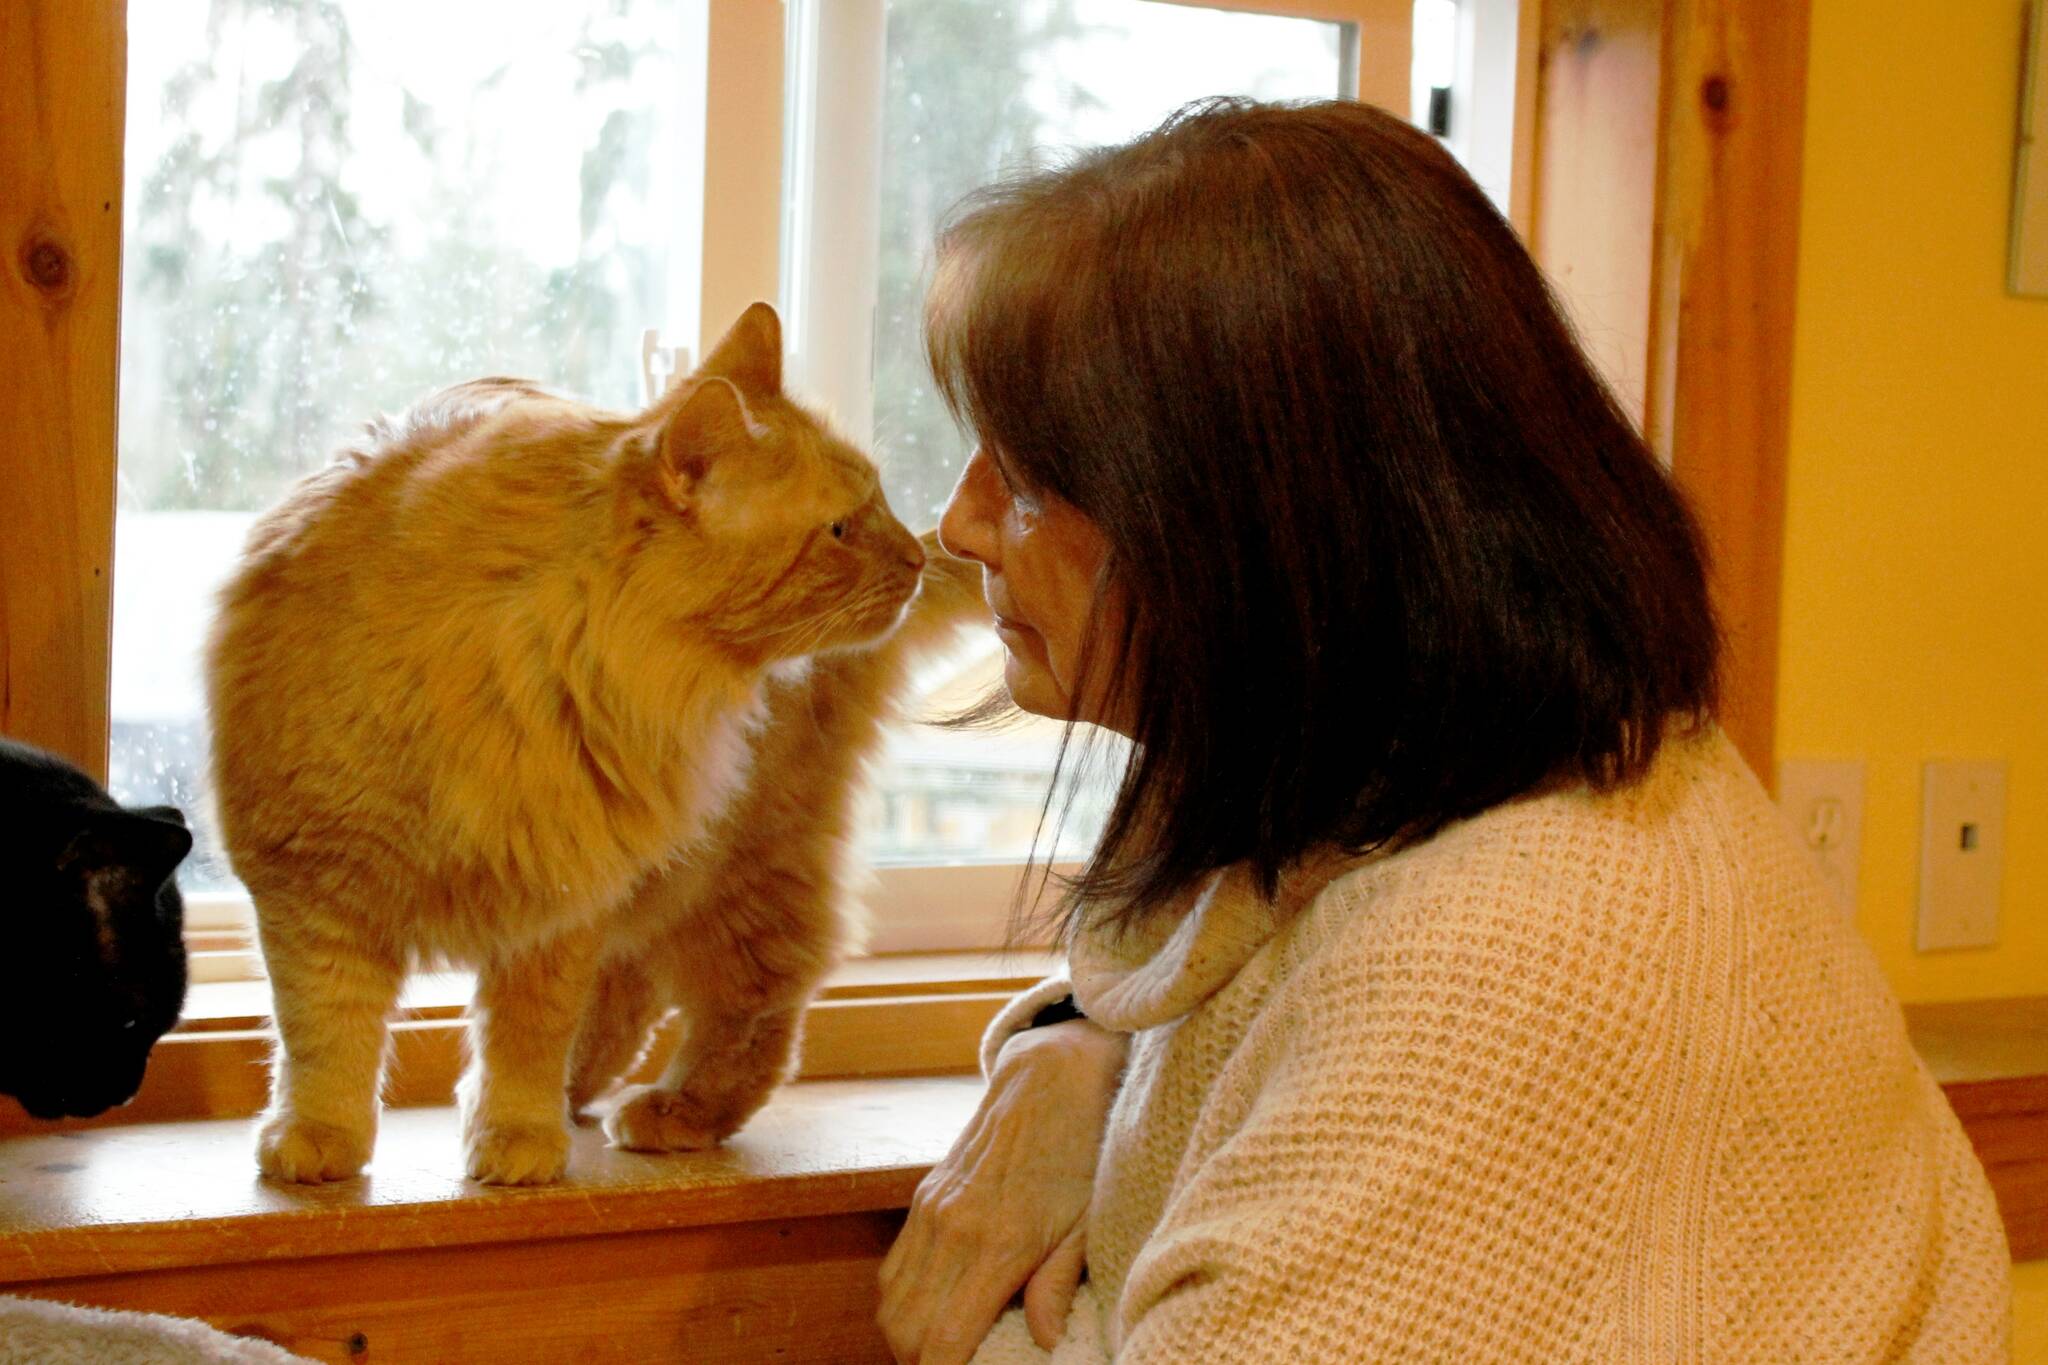 Photos by Kira Erickson/Whidbey News Group
Pet communicator Maureen Belle shares a kiss with Mango, a cat currently residing at the WAIF Cat Cottage who is looking for a home. Below, Beerus, Mango’s brother, is a normally shy kitty who usually stays hidden around visitors. He greeted Belle during a recent visit and seemed at ease with her.